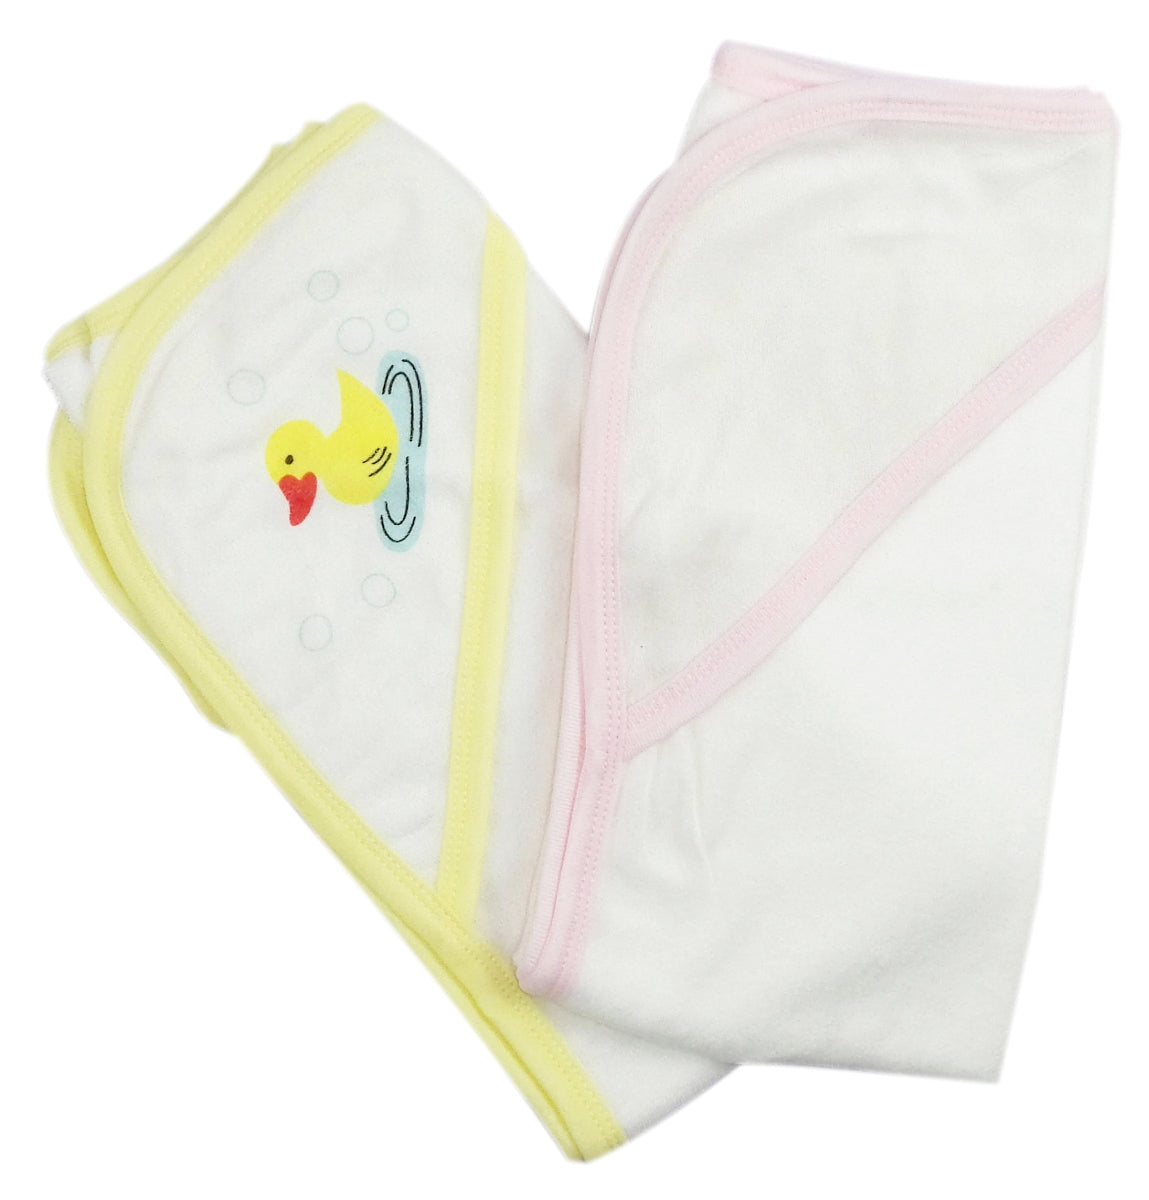 Bambini 021-Yellow-021B-Pink Infant Hooded Bath Towel, Pink & Whit